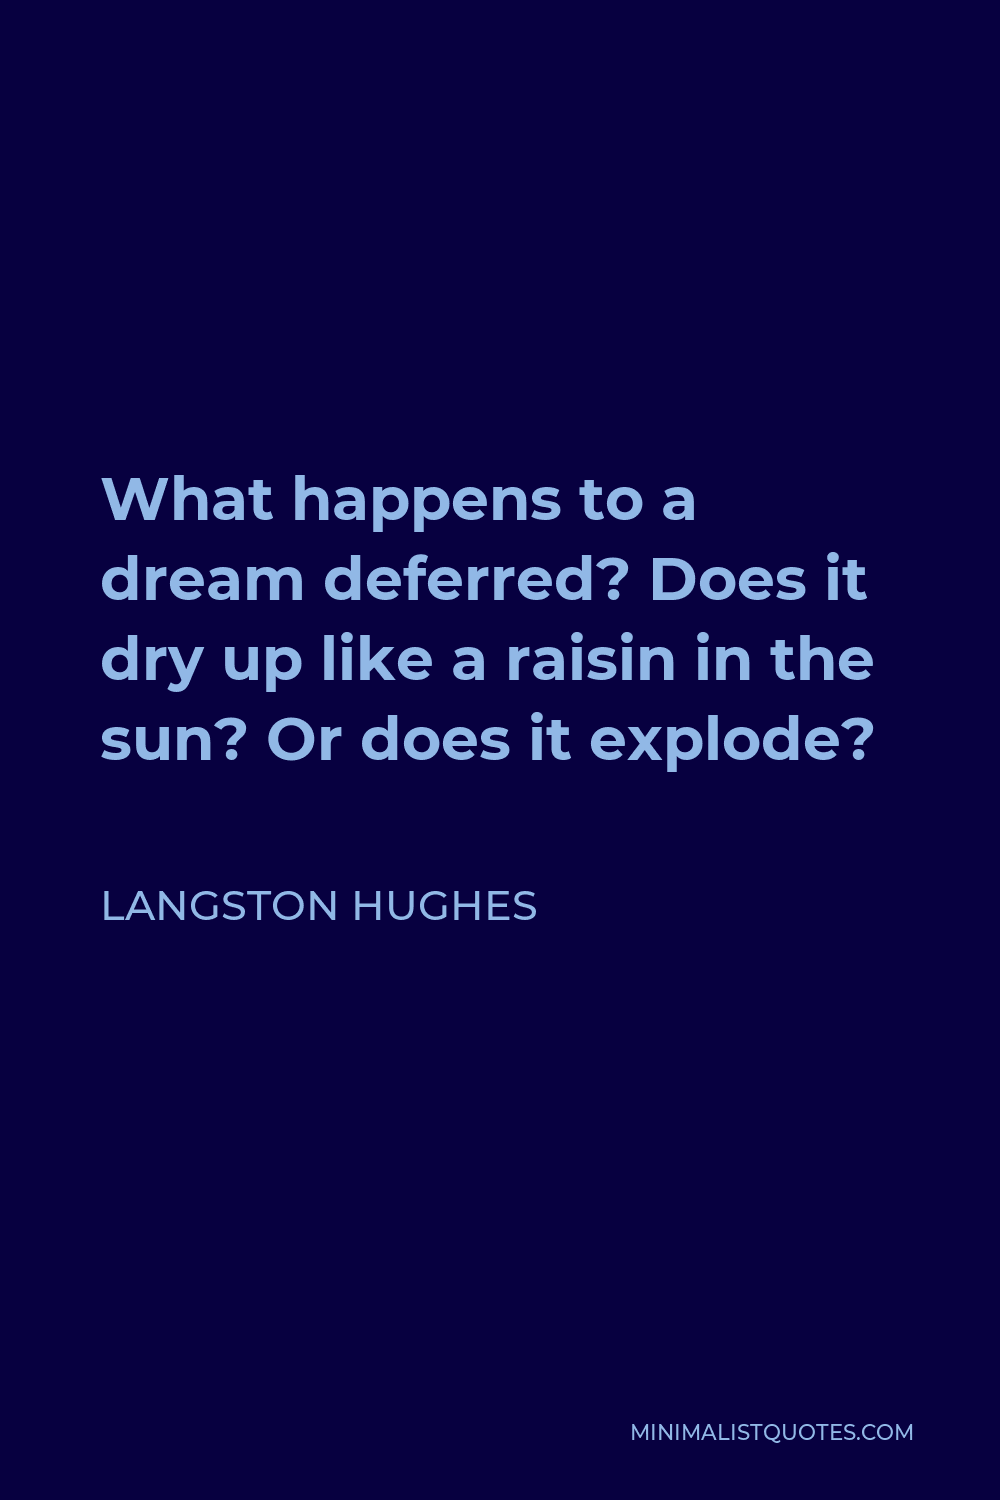 Langston Hughes Quote - What happens to a dream deferred? Does it dry up like a raisin in the sun? Or does it explode?